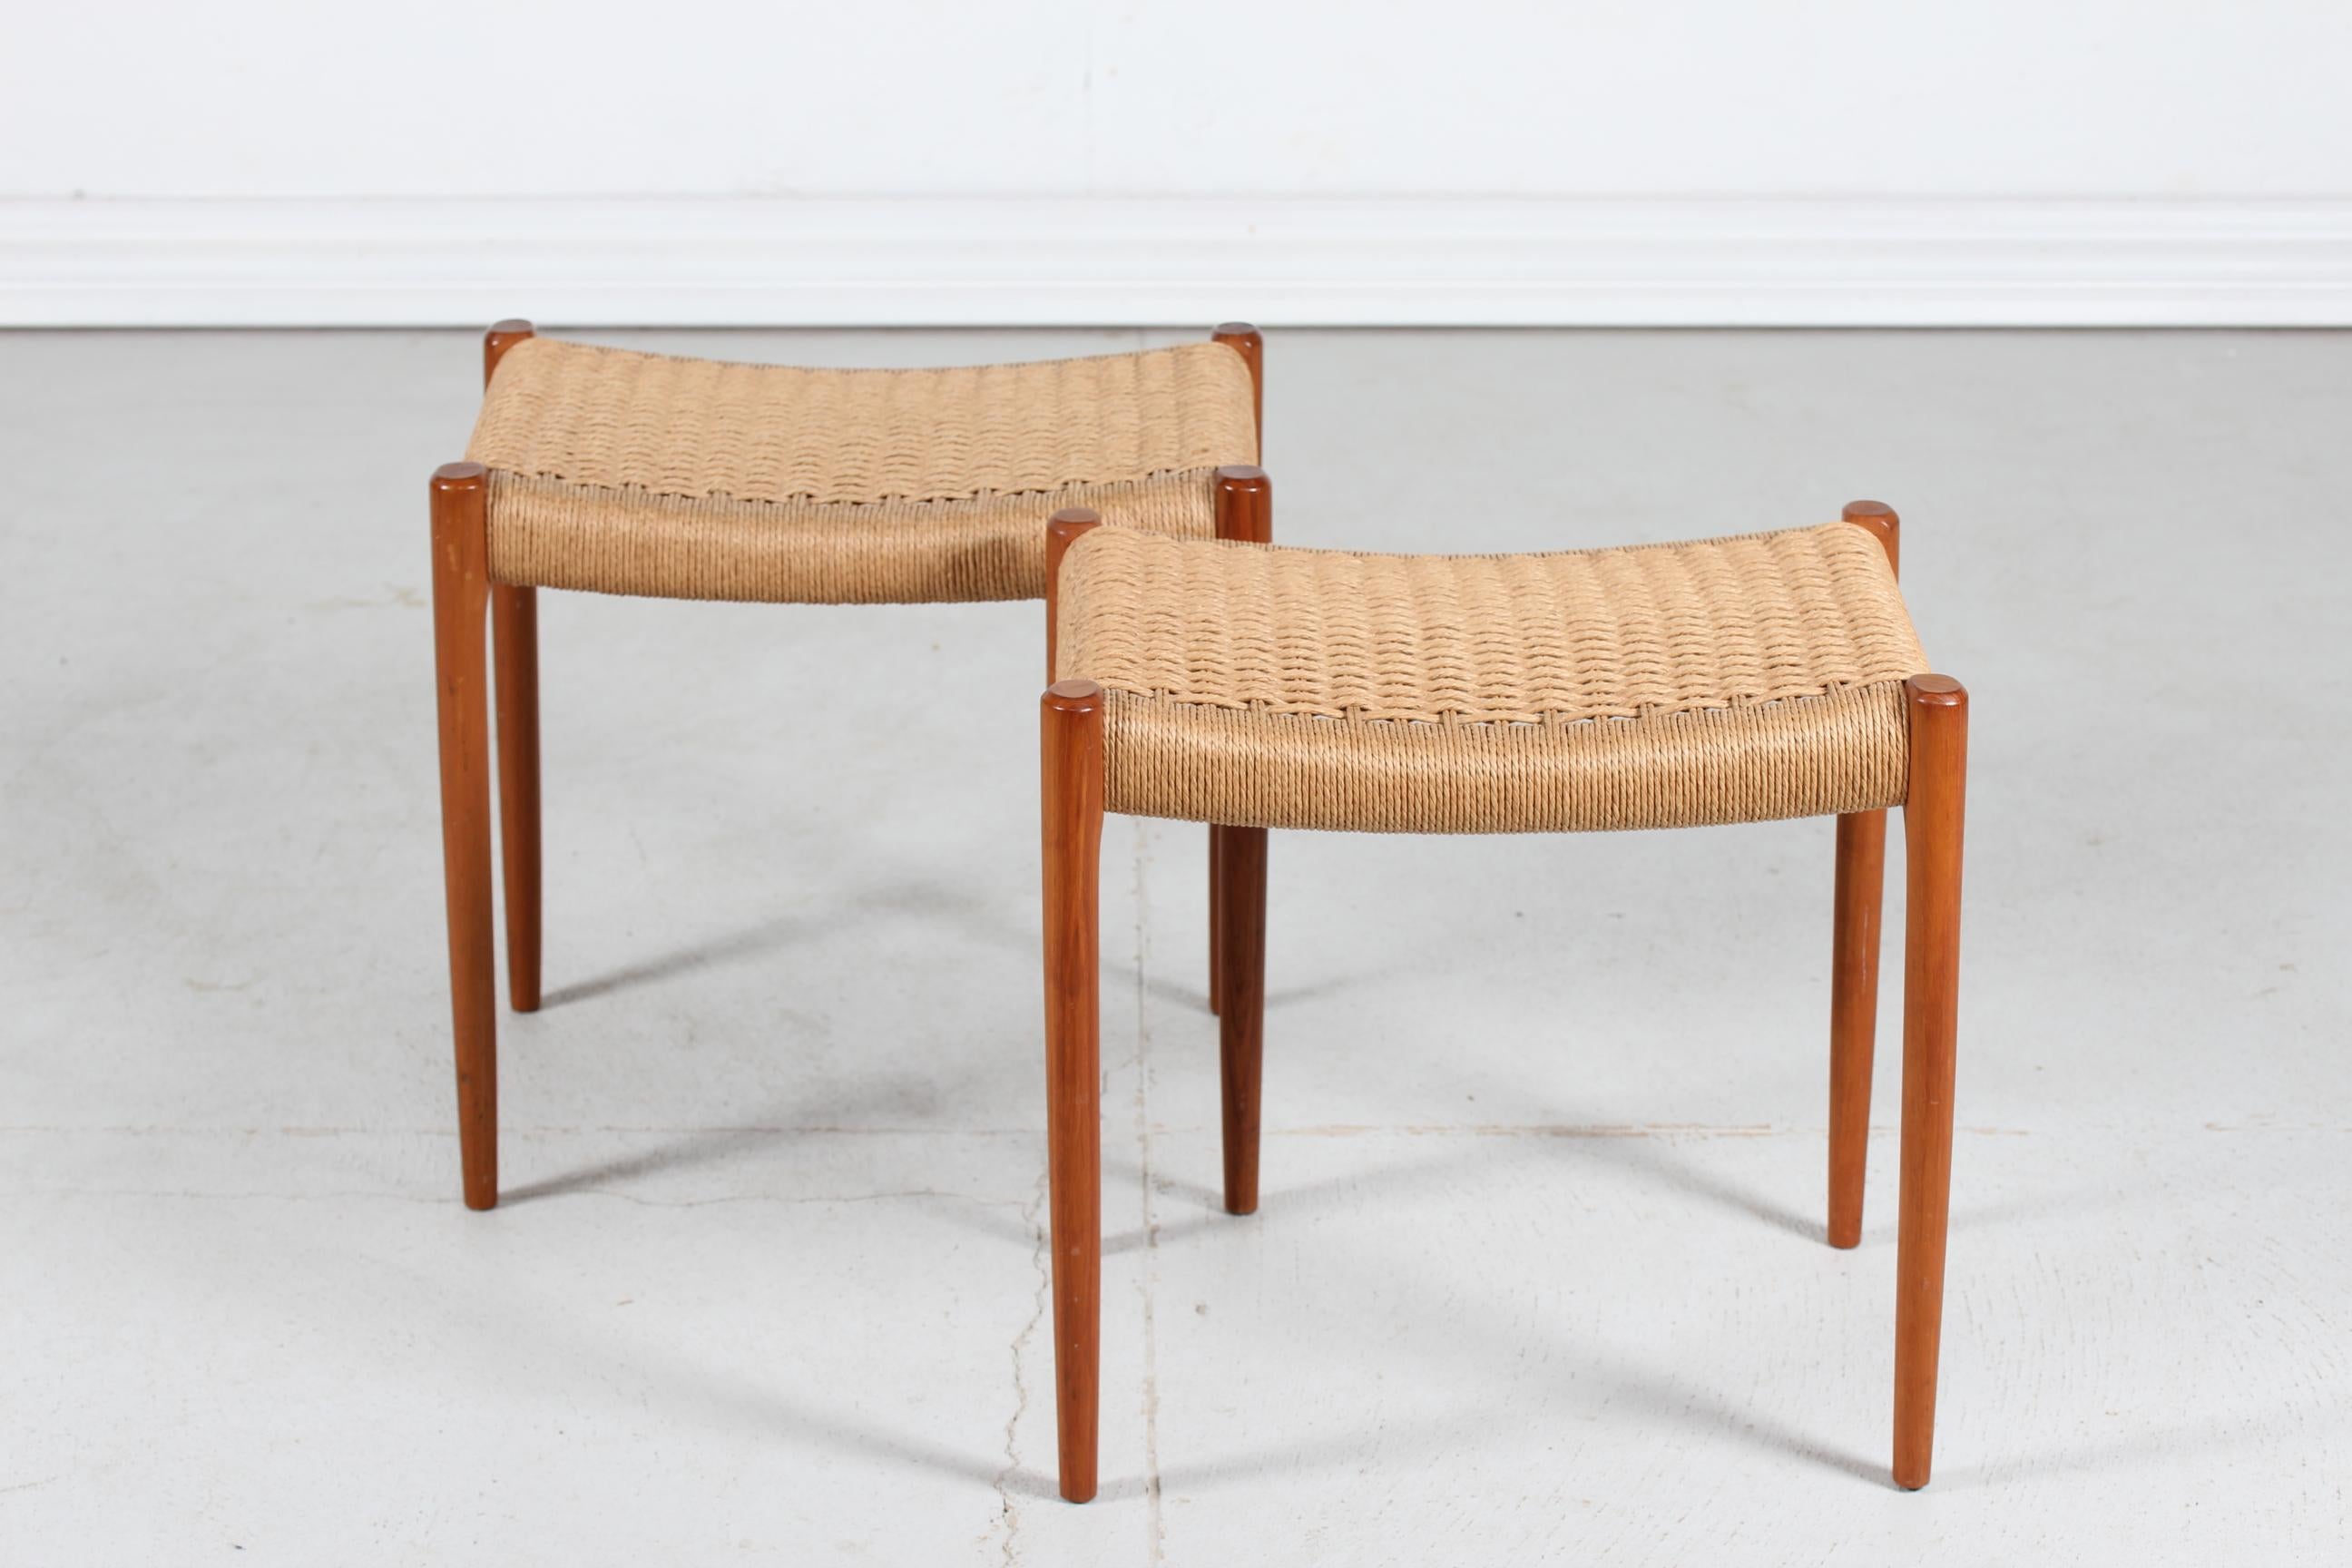 A pair of stools model no. 80A designed in 1963 by the Danish cabinet maker and furniture designer Niels Otto Møller (1920-1982) manufactured by J. L. Møllers Møbelfabrik, Aarhus, Denmark in the 1960s.

The stools are made of solid teak with seat